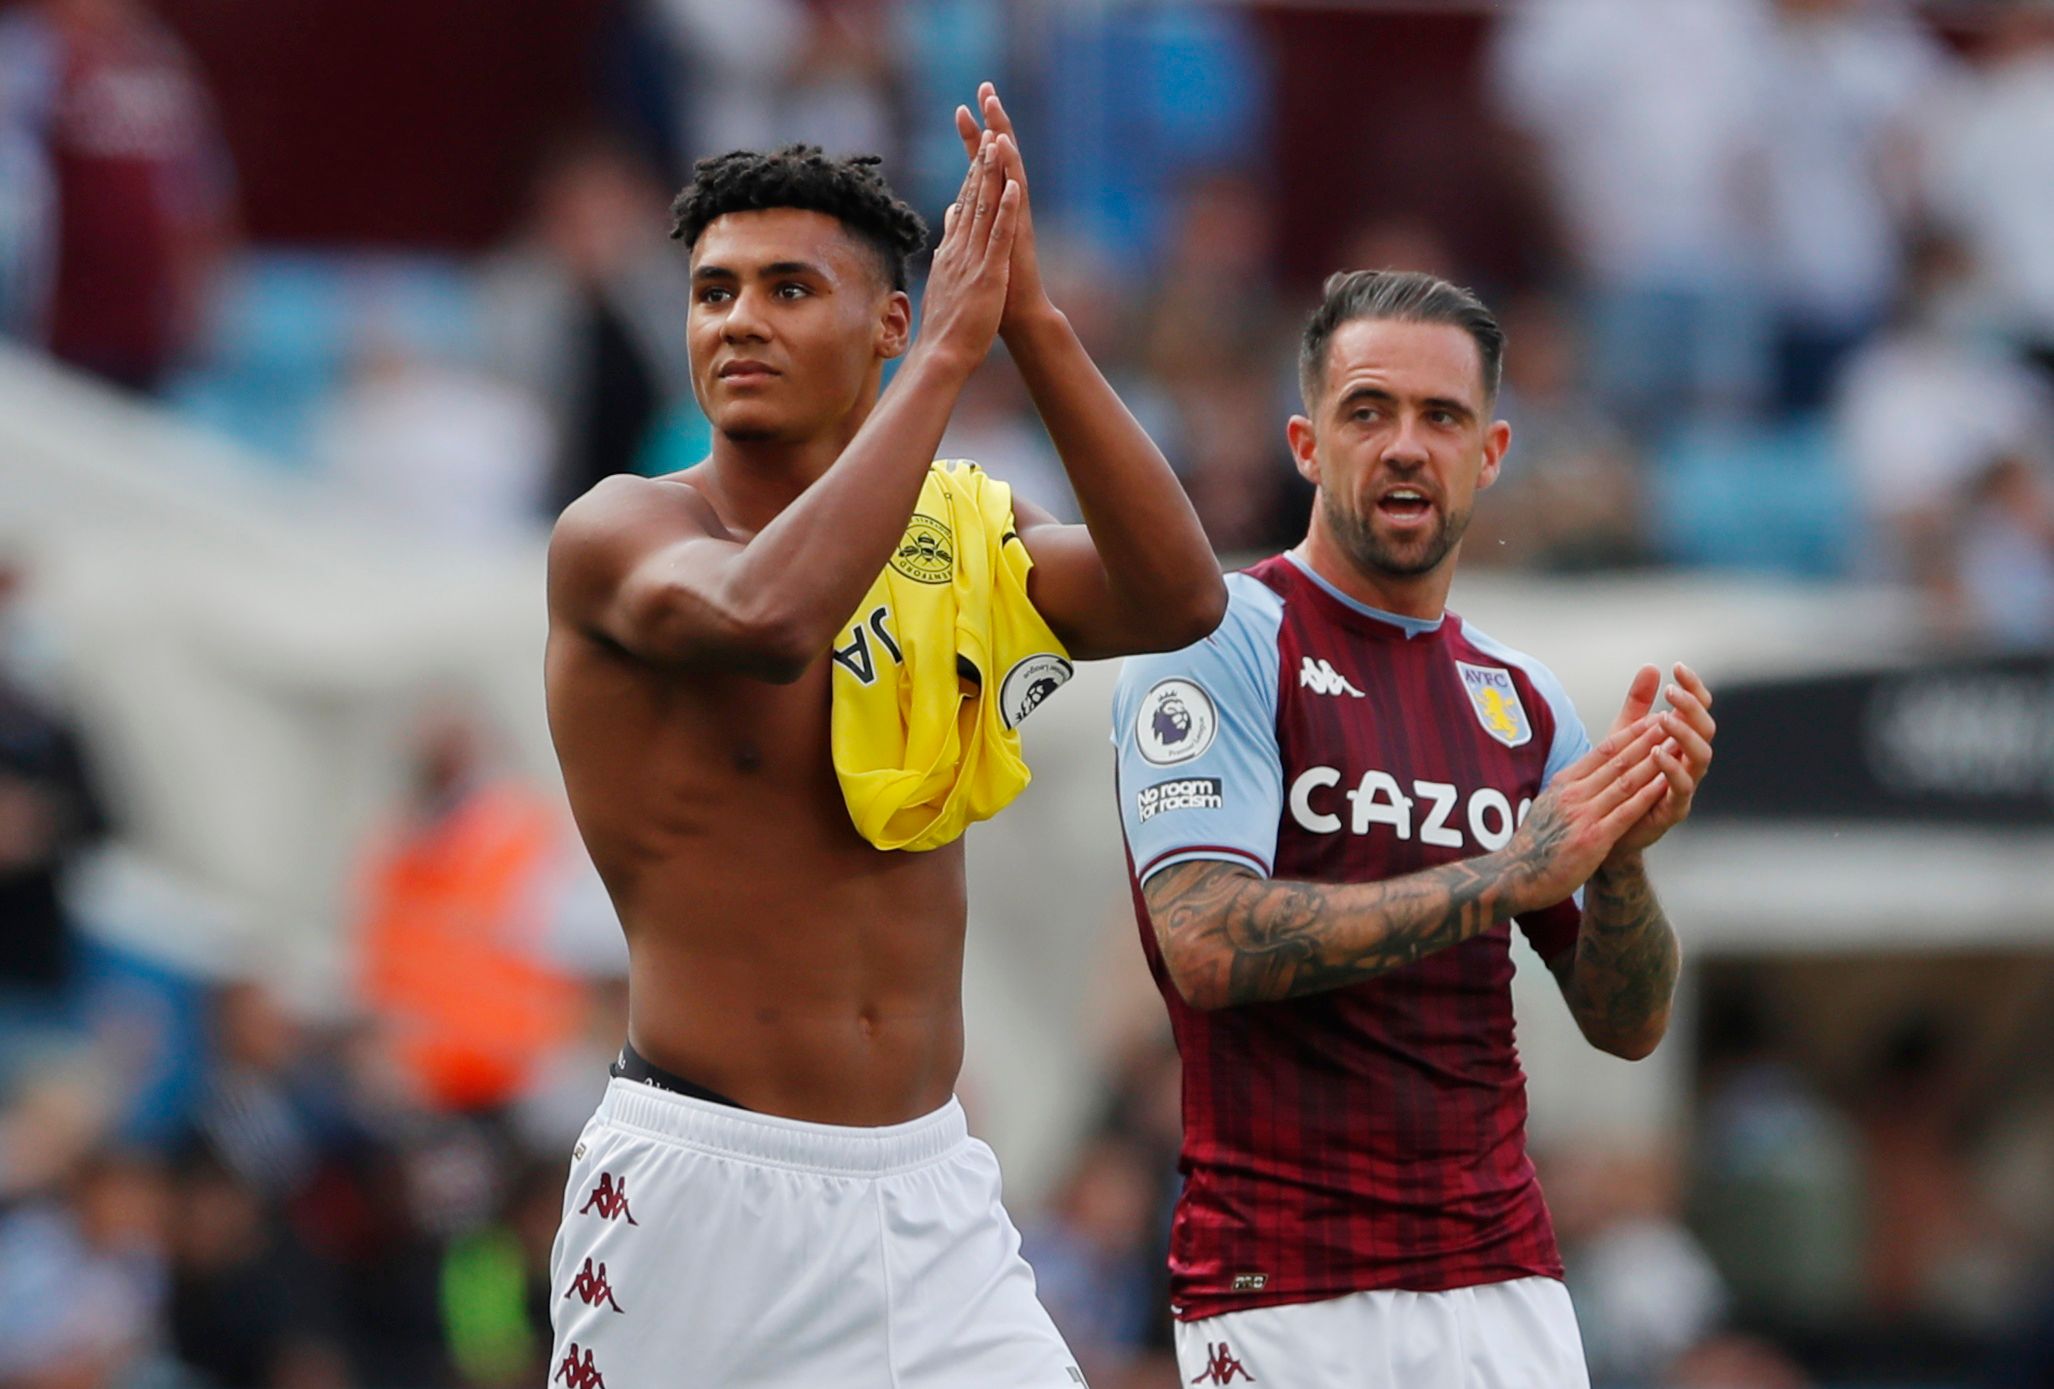 Soccer Football - Premier League - Aston Villa v Brentford - Villa Park, Birmingham, Britain - August 28, 2021 Aston Villa's Ollie Watkins applauds the fans with Danny Ings after the match Action Images via Reuters/Andrew Couldridge EDITORIAL USE ONLY. No use with unauthorized audio, video, data, fixture lists, club/league logos or 'live' services. Online in-match use limited to 75 images, no video emulation. No use in betting, games or single club /league/player publications.  Please contact yo